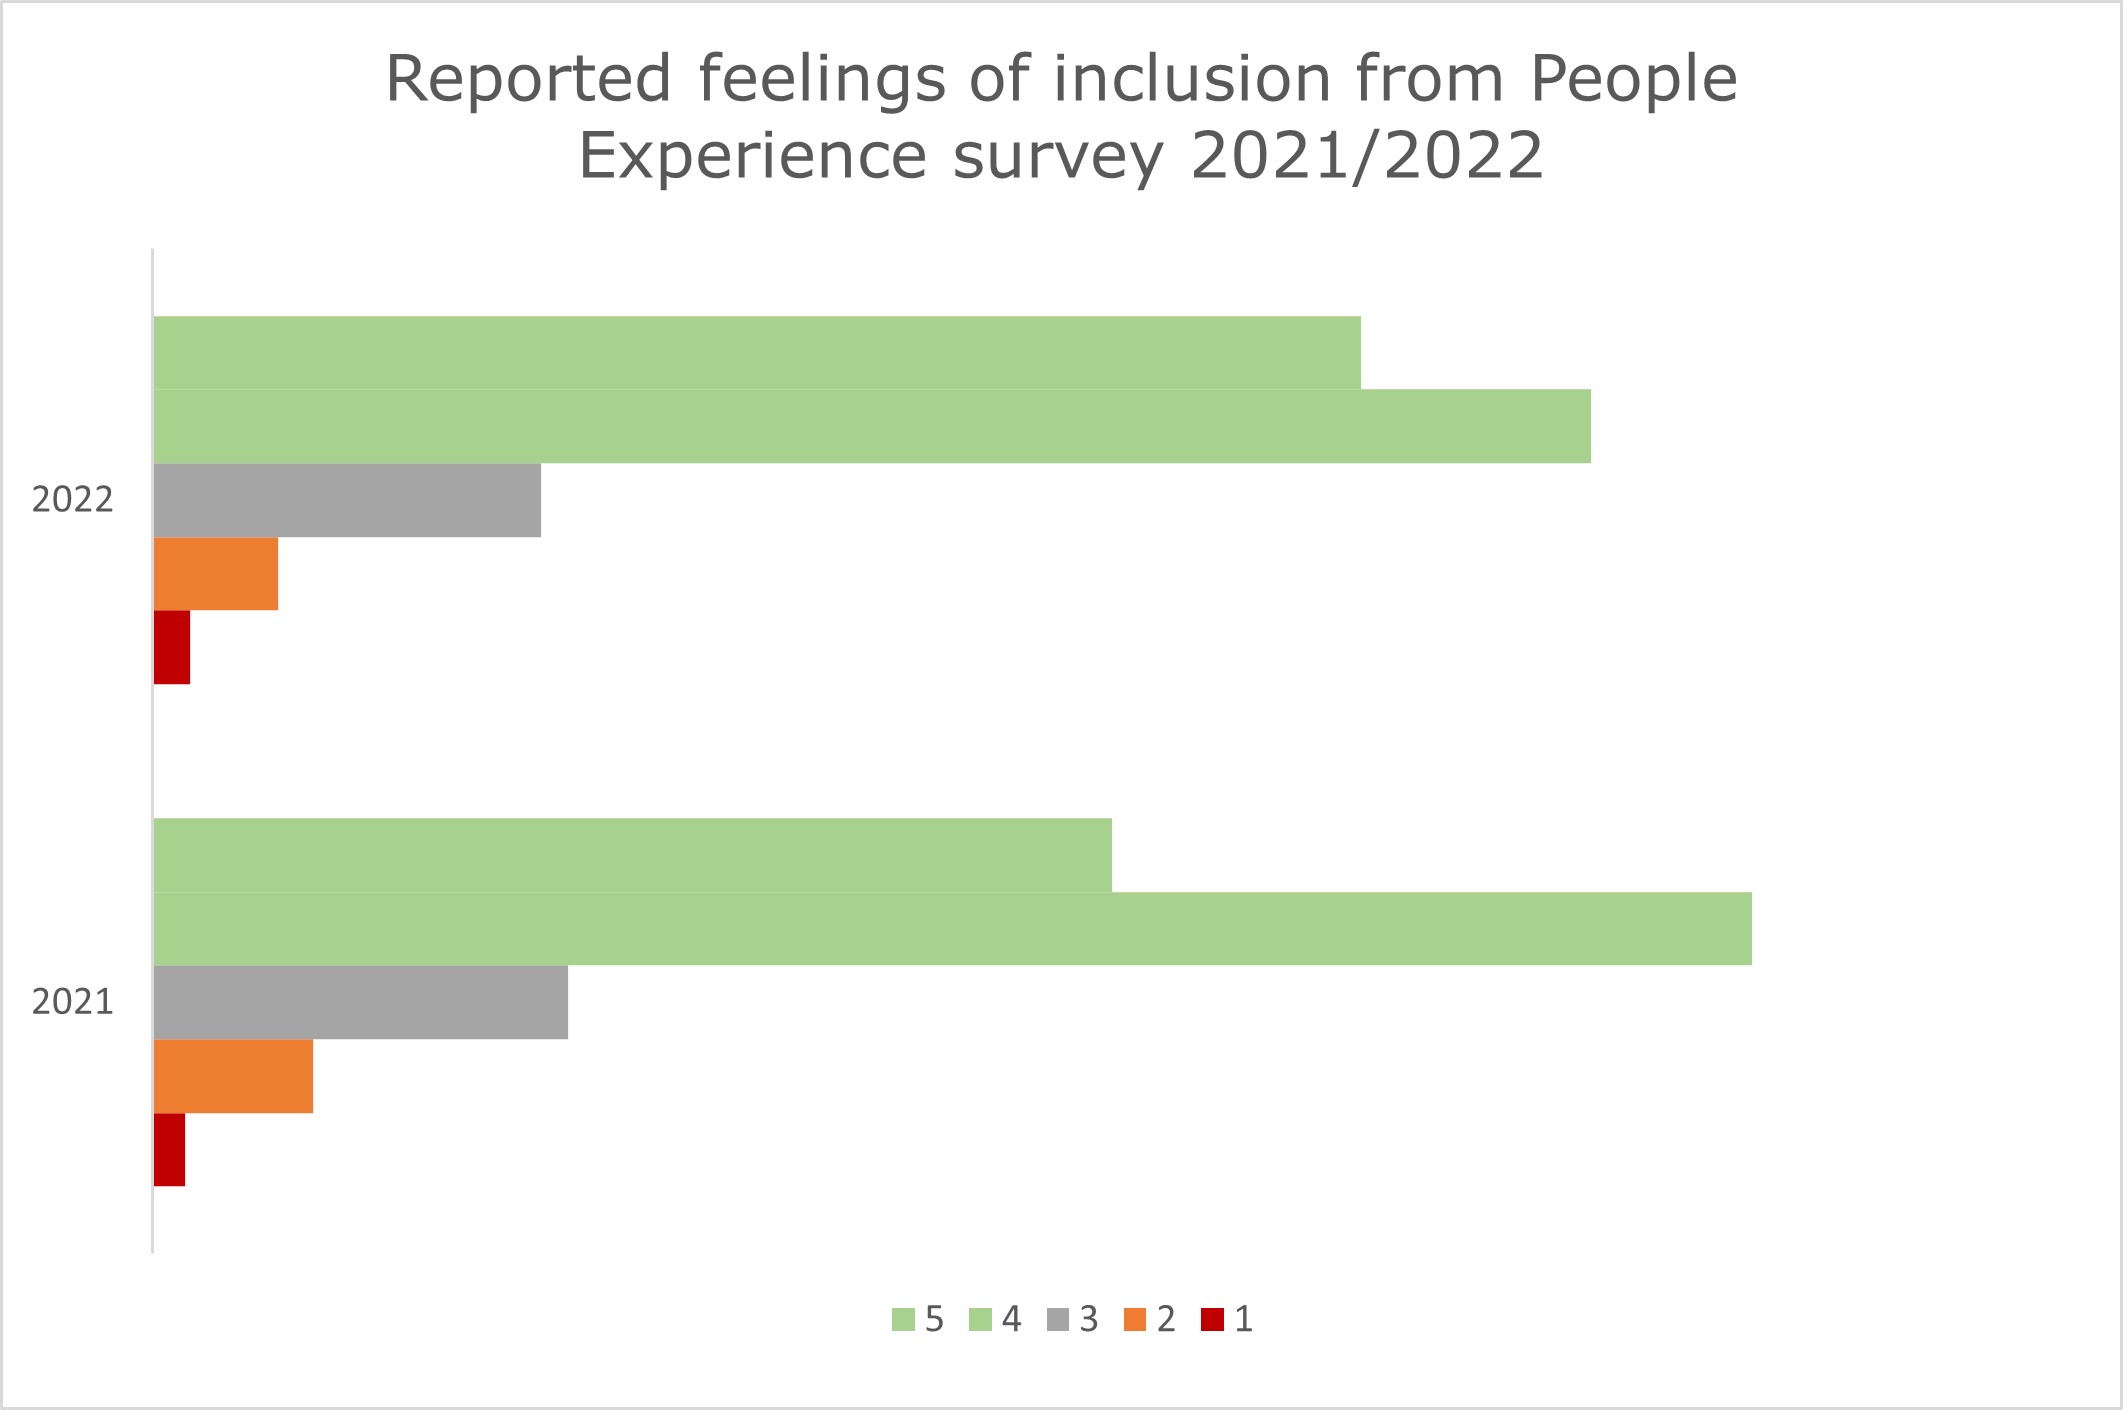 Bar graph showing reported feelings of inclusion over the 2021 to 2022 years. The vertical axis shows the years. Coloured bars for the numbers 1 to 5 indicate the degree to which people feel included